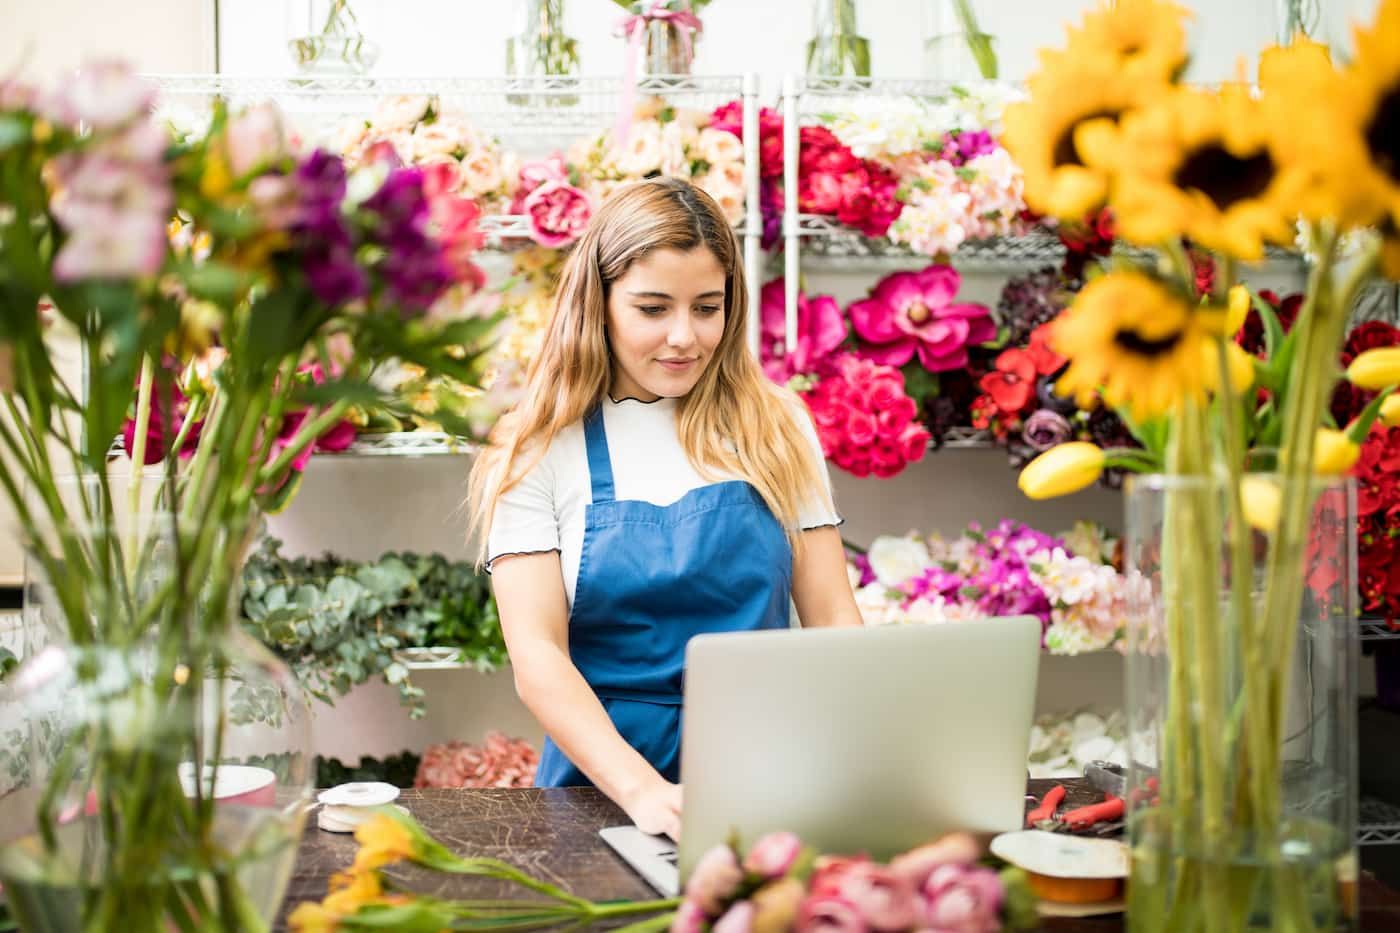 How To Start A Flower Business